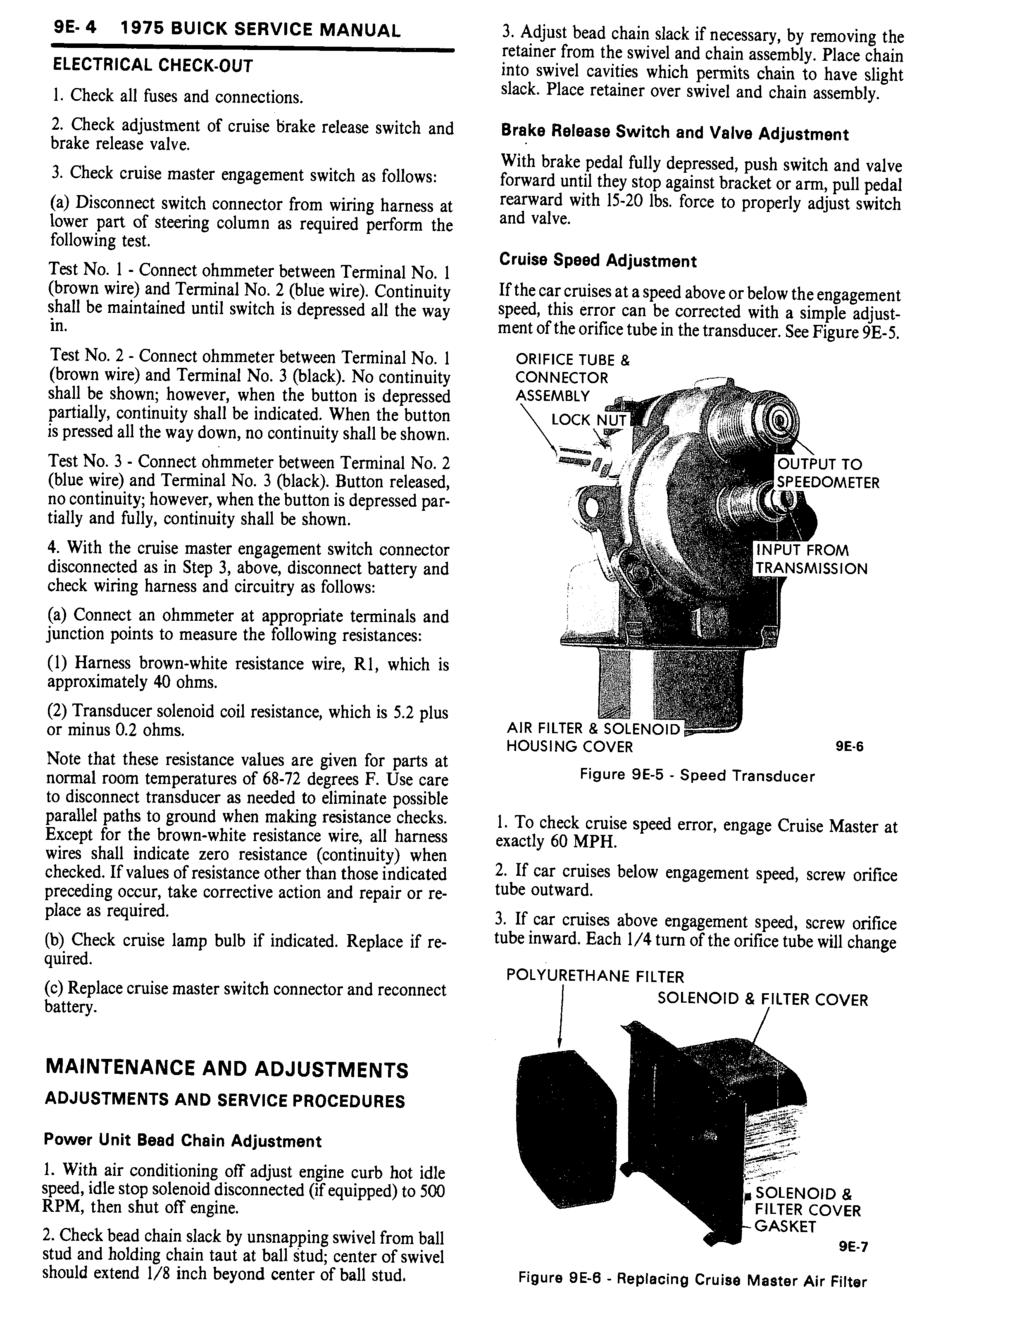 9E- 4 1975 BUICK SERVICE MANUAL ELECTRICAL CHECKOUT 1. Check all fuses and connections. 2. Check adjustment of cruise brake release switch and brake release valve. 3.